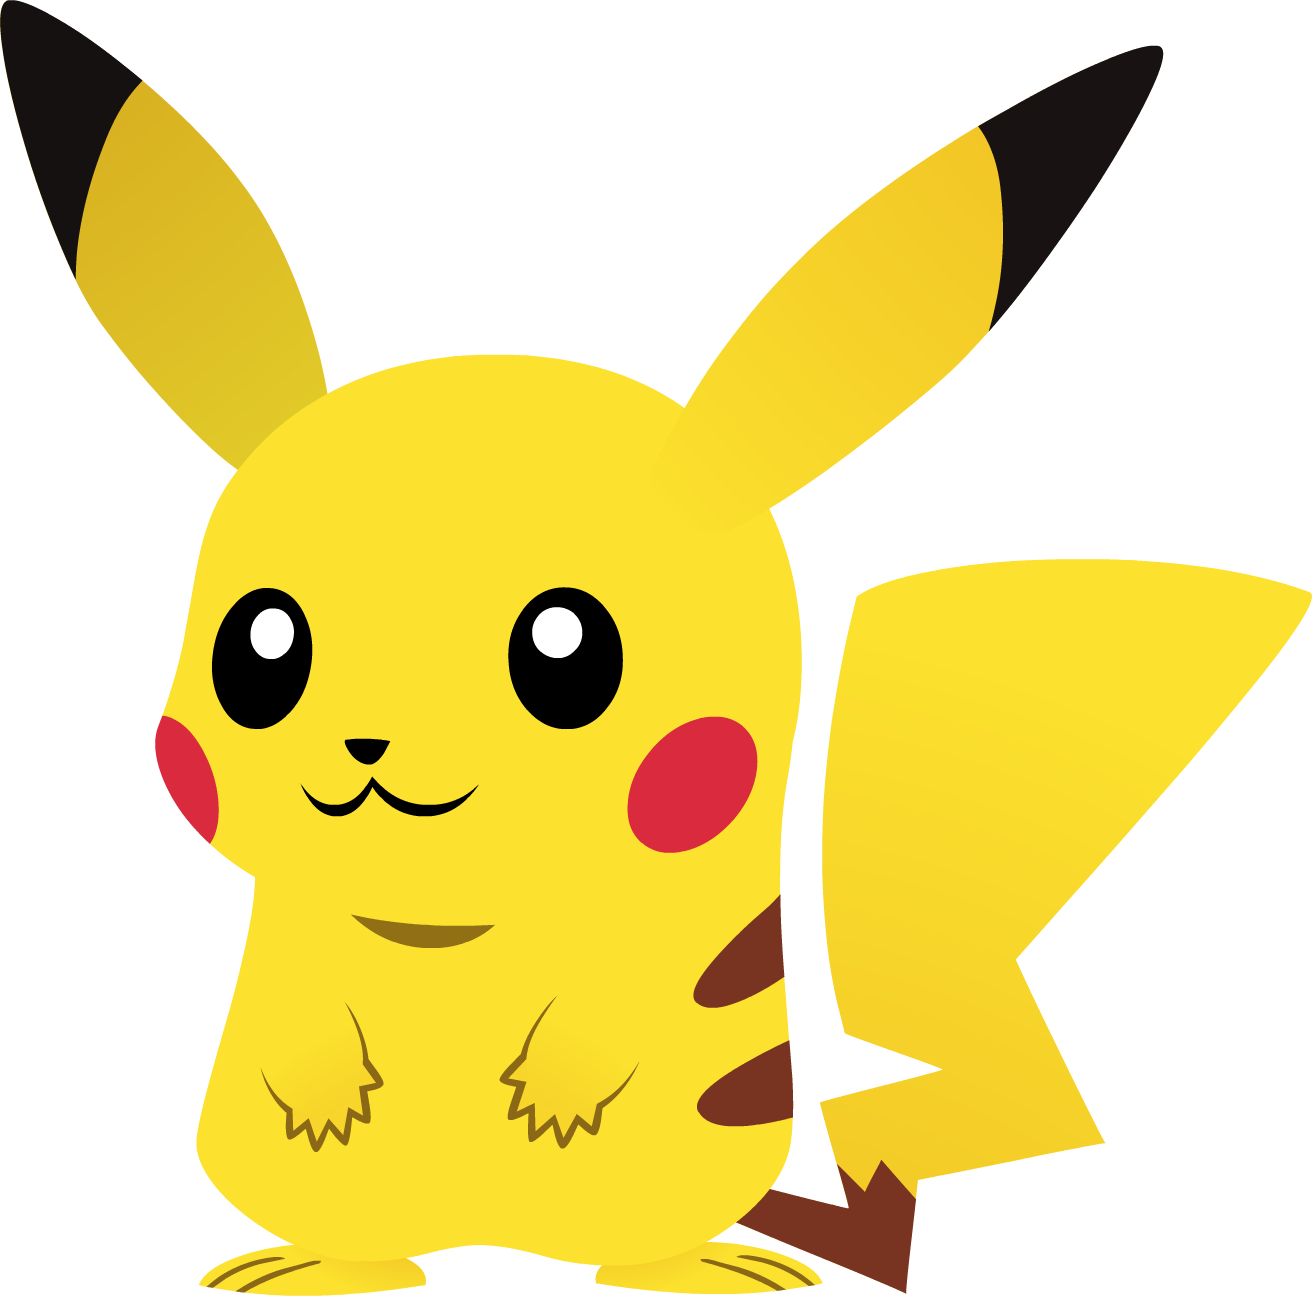 Pikachu clipart png icon, Picture #1893488 pikachu clipart.